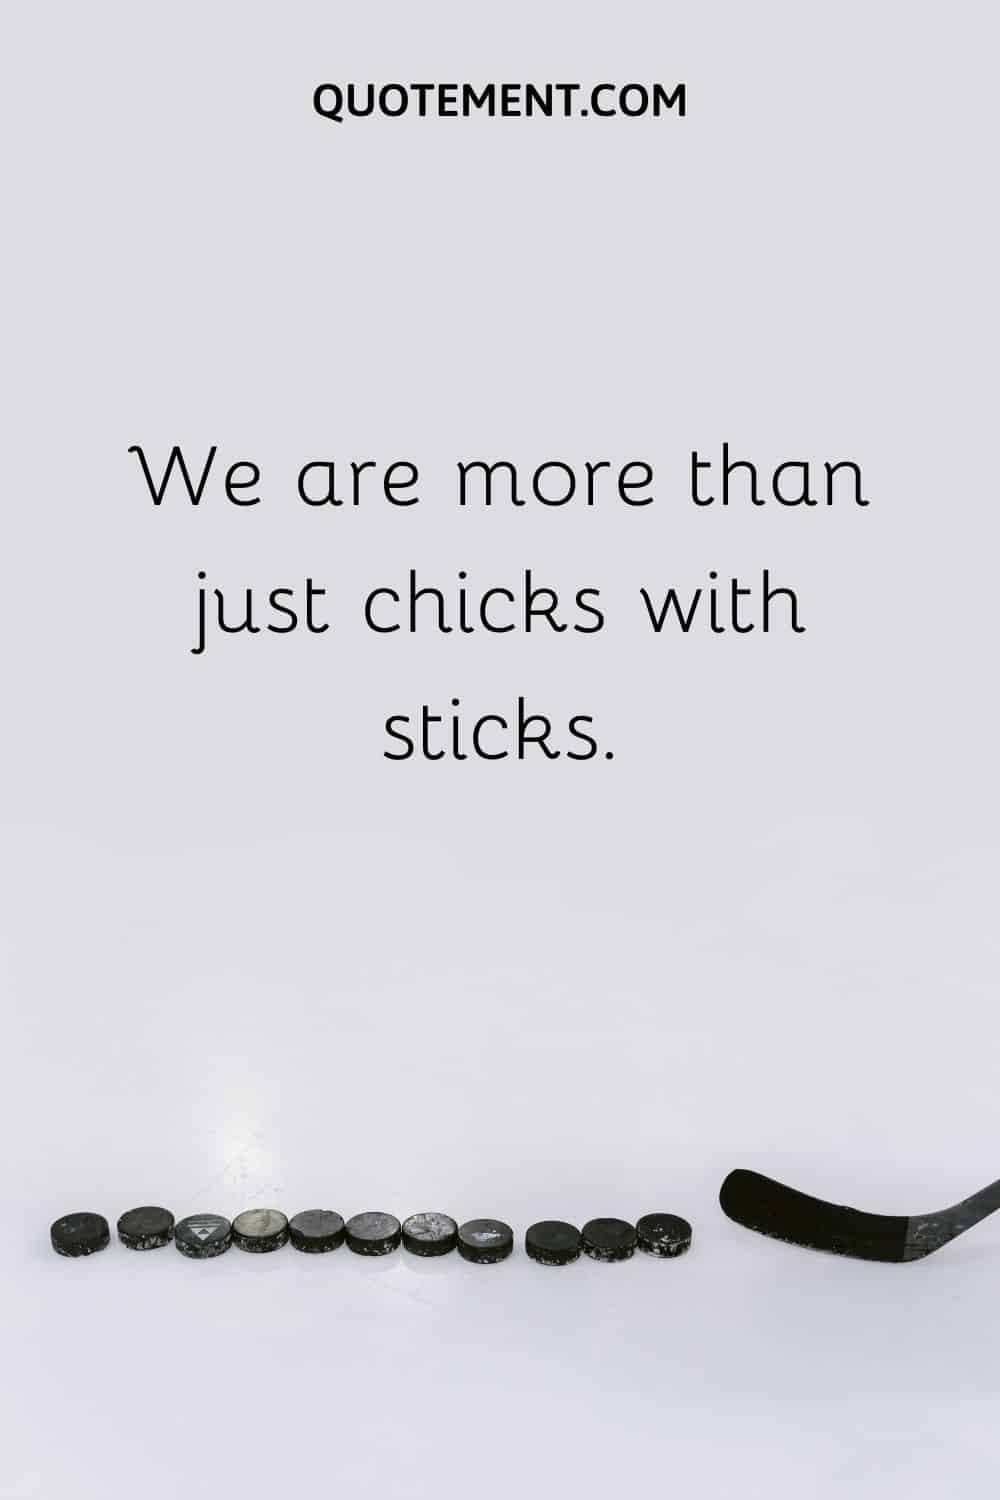 We are more than just chicks with sticks.